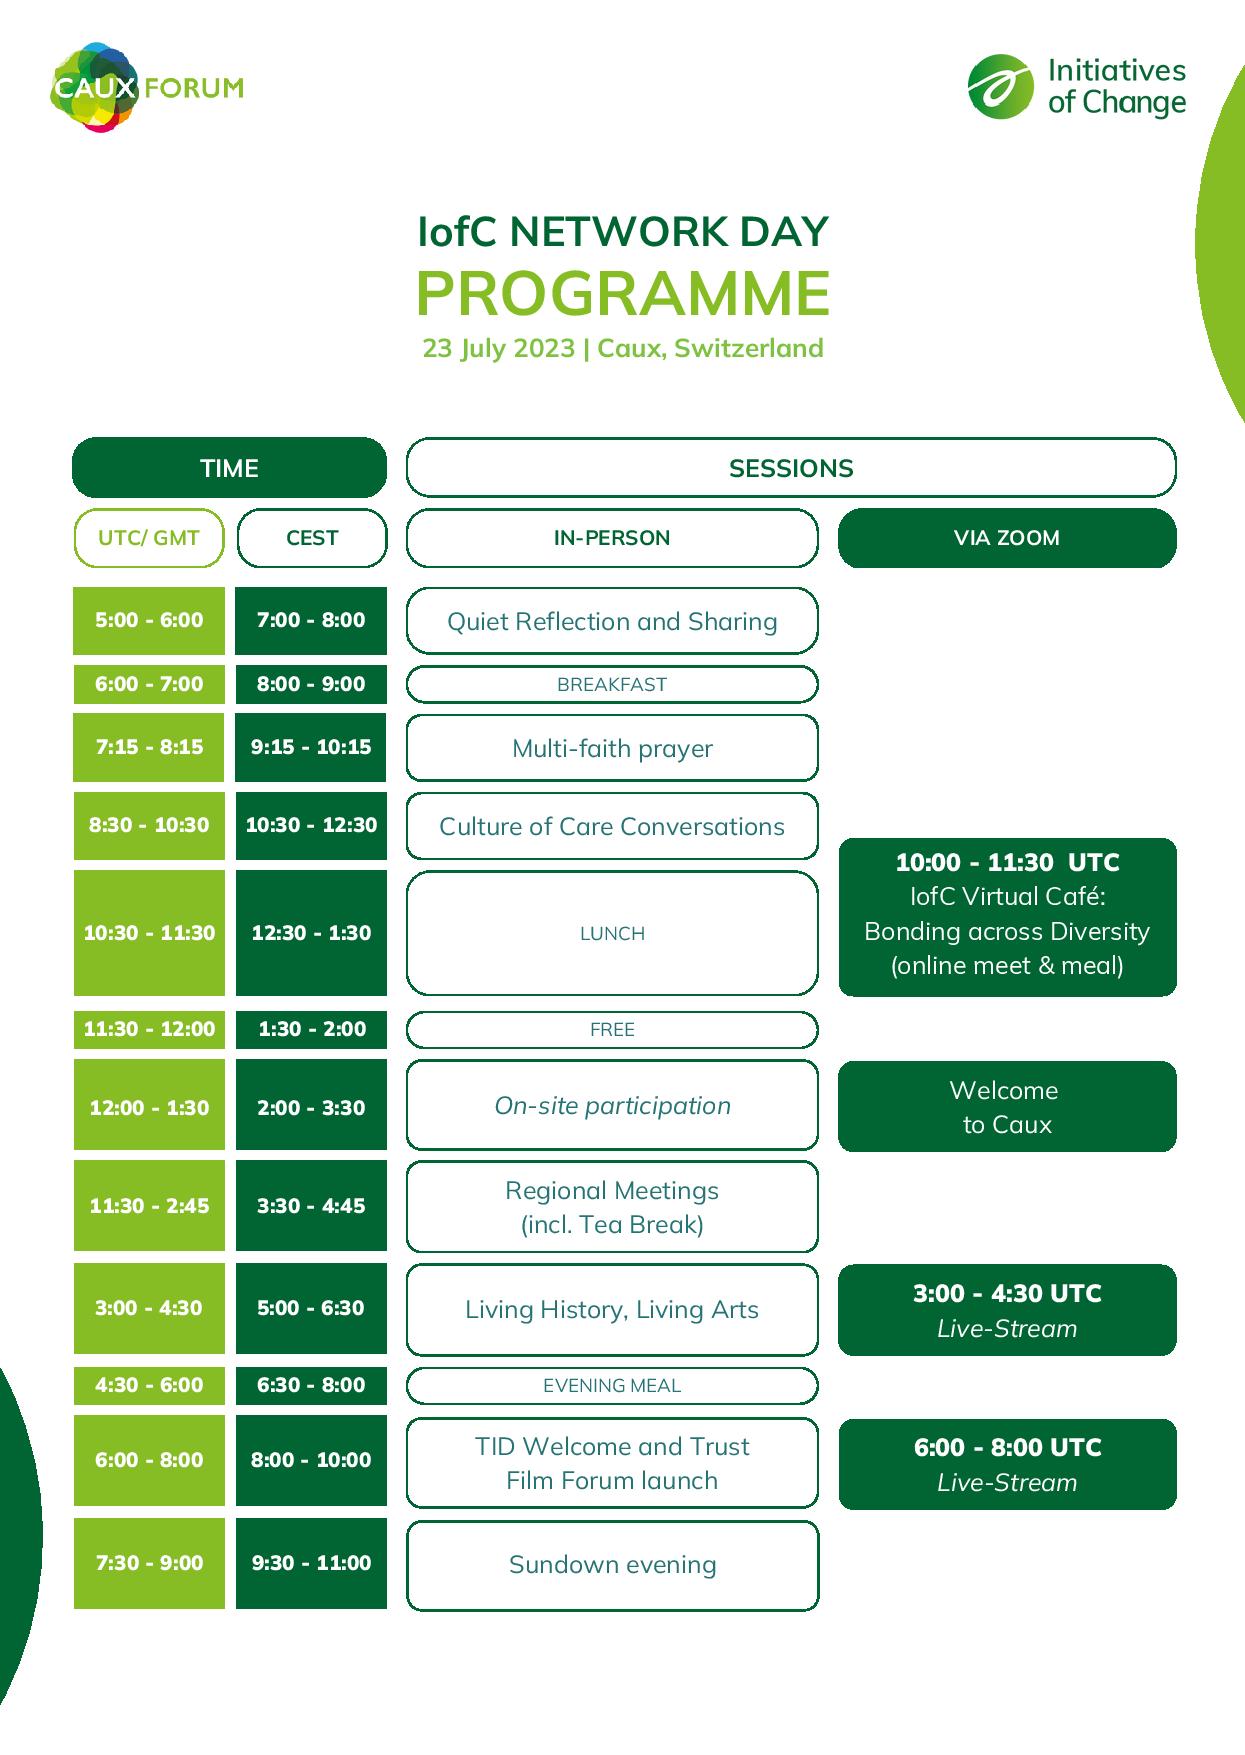 Caux Forum Network Day 2023 Programme 23 July